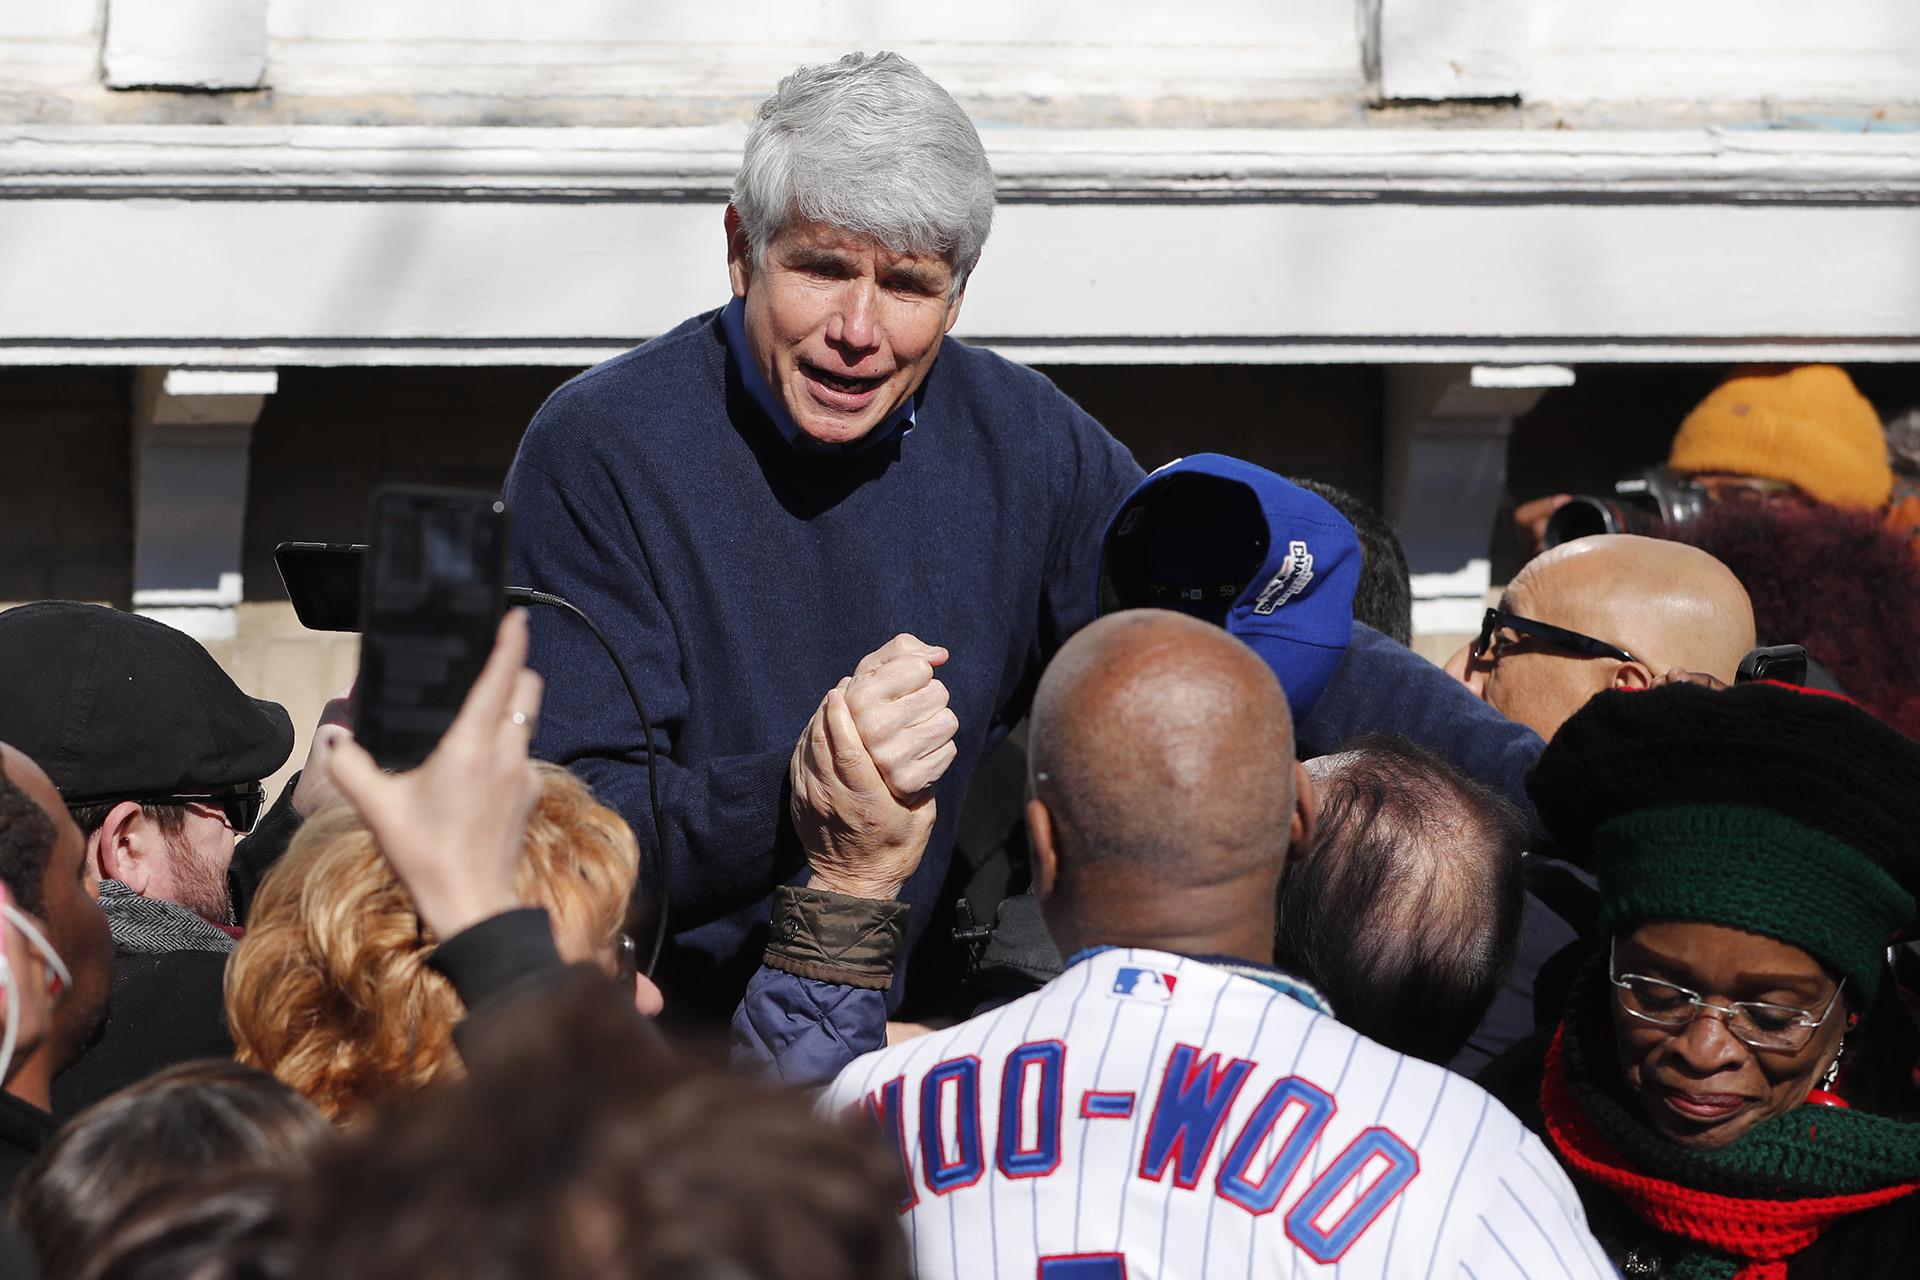 Former Illinois Gov. Rod Blagojevich acknowledges Chicago Cubs’ fan Ronnie Woo Woo after a news conference outside his home Wednesday, Feb. 19, 2020, in Chicago. (AP Photo / Charles Rex Arbogast)